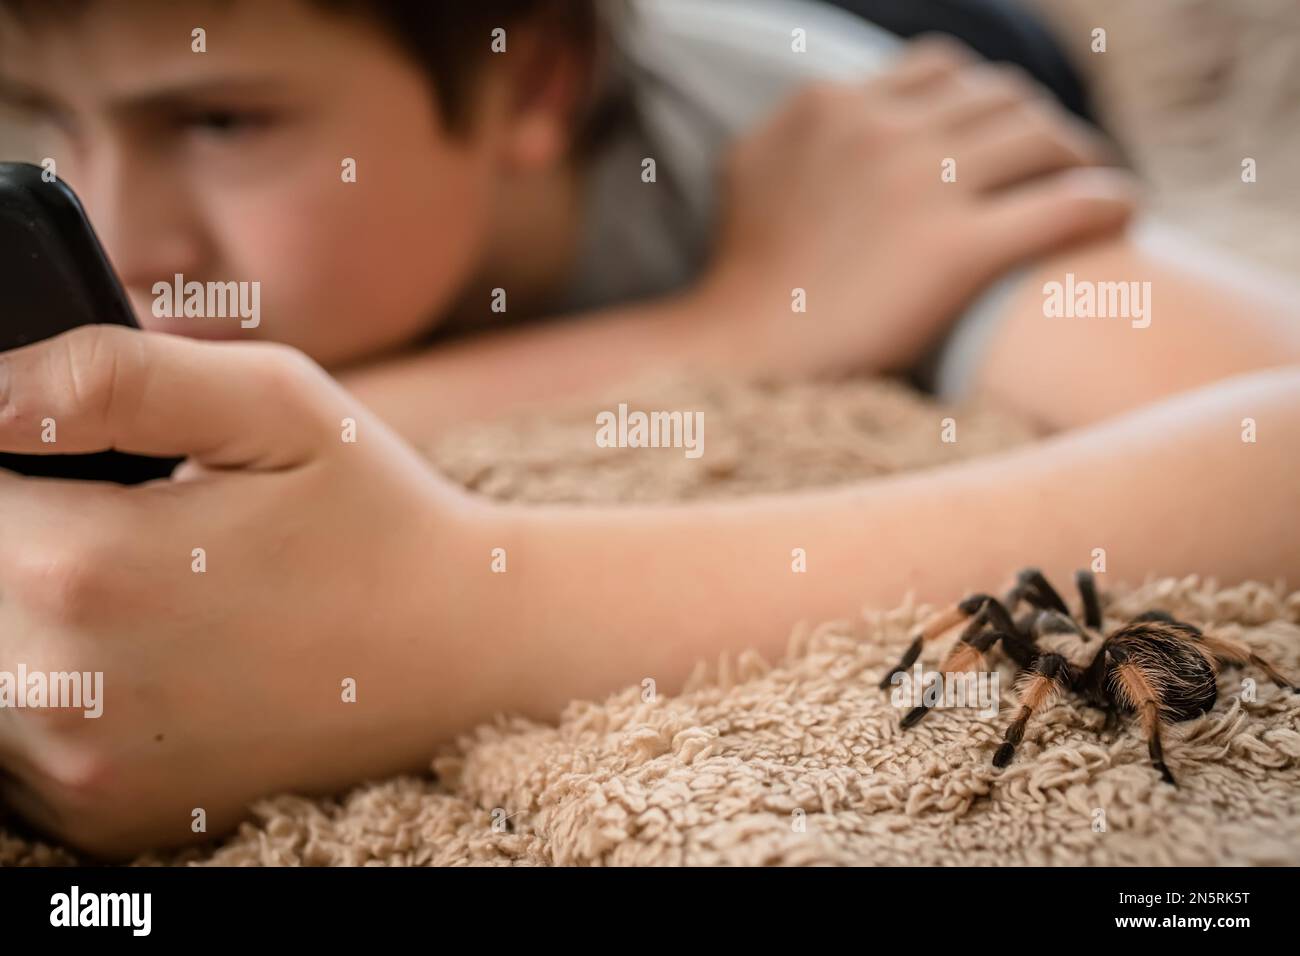 A large tarantula spider crawls over the bed. A guy with arachnophobia does not notice a huge spider approaching him. Stock Photo